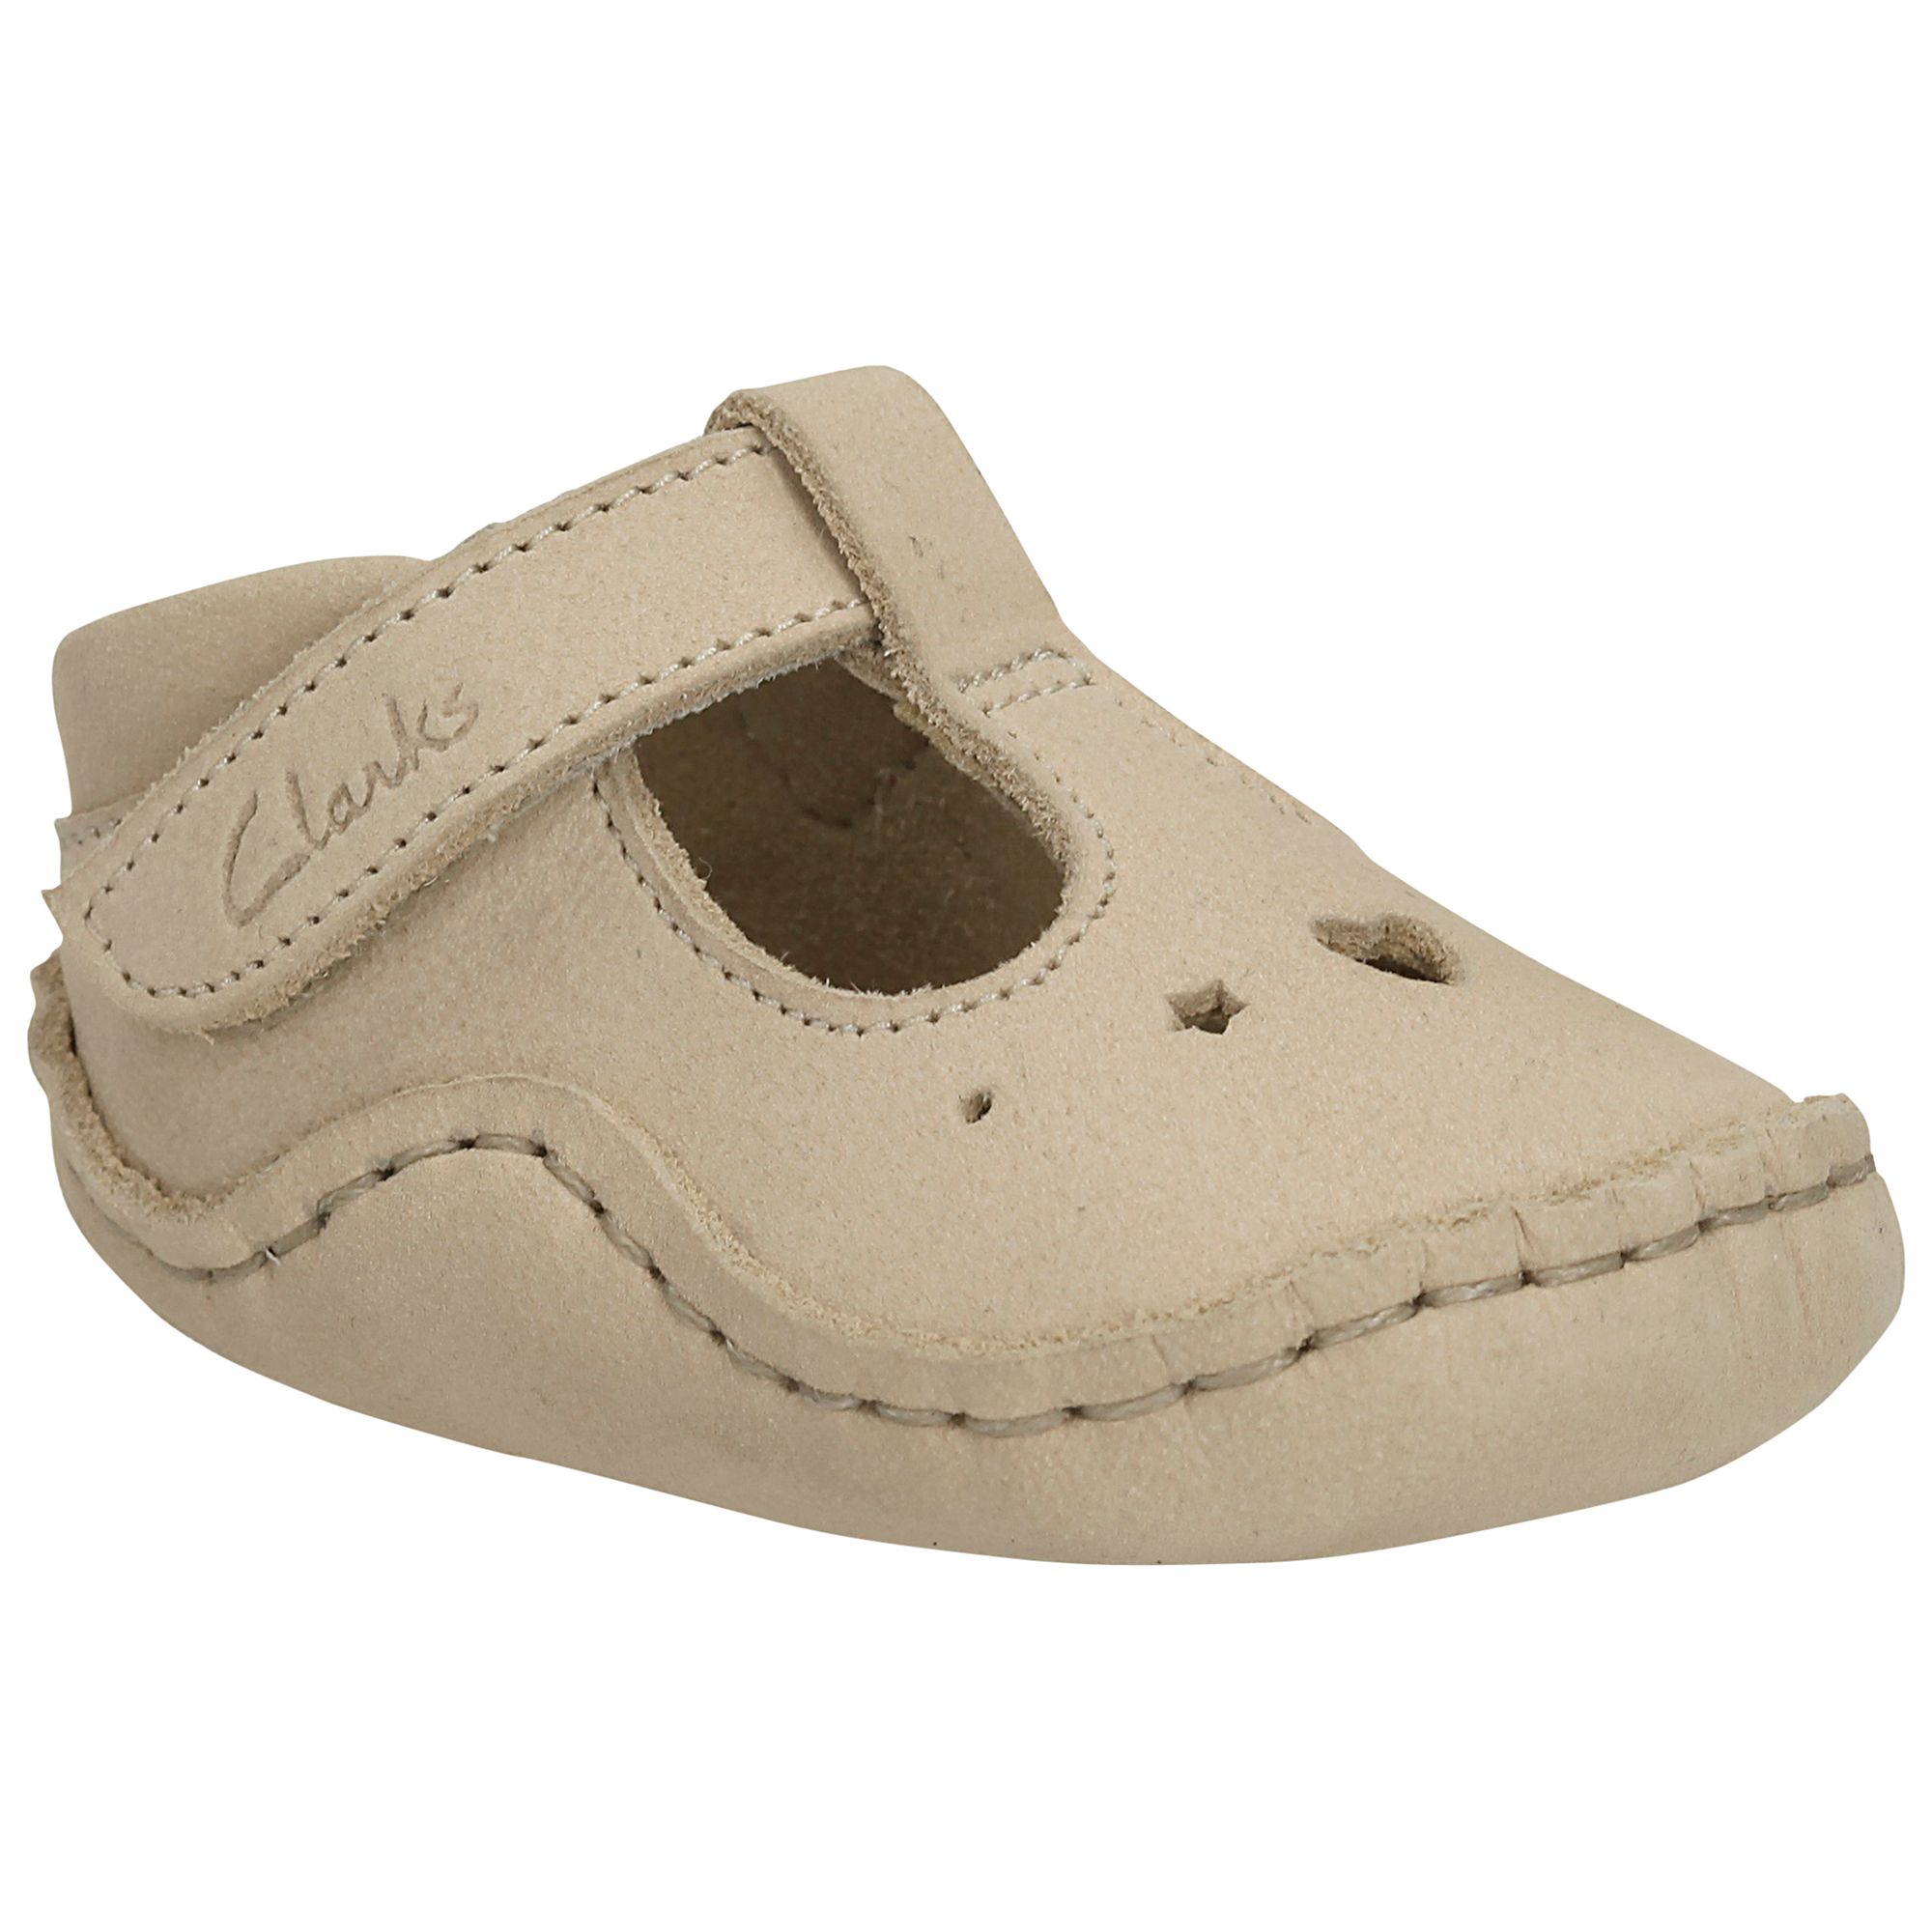 Clarks Baby Toy Pre-Walker Shoes, Cream